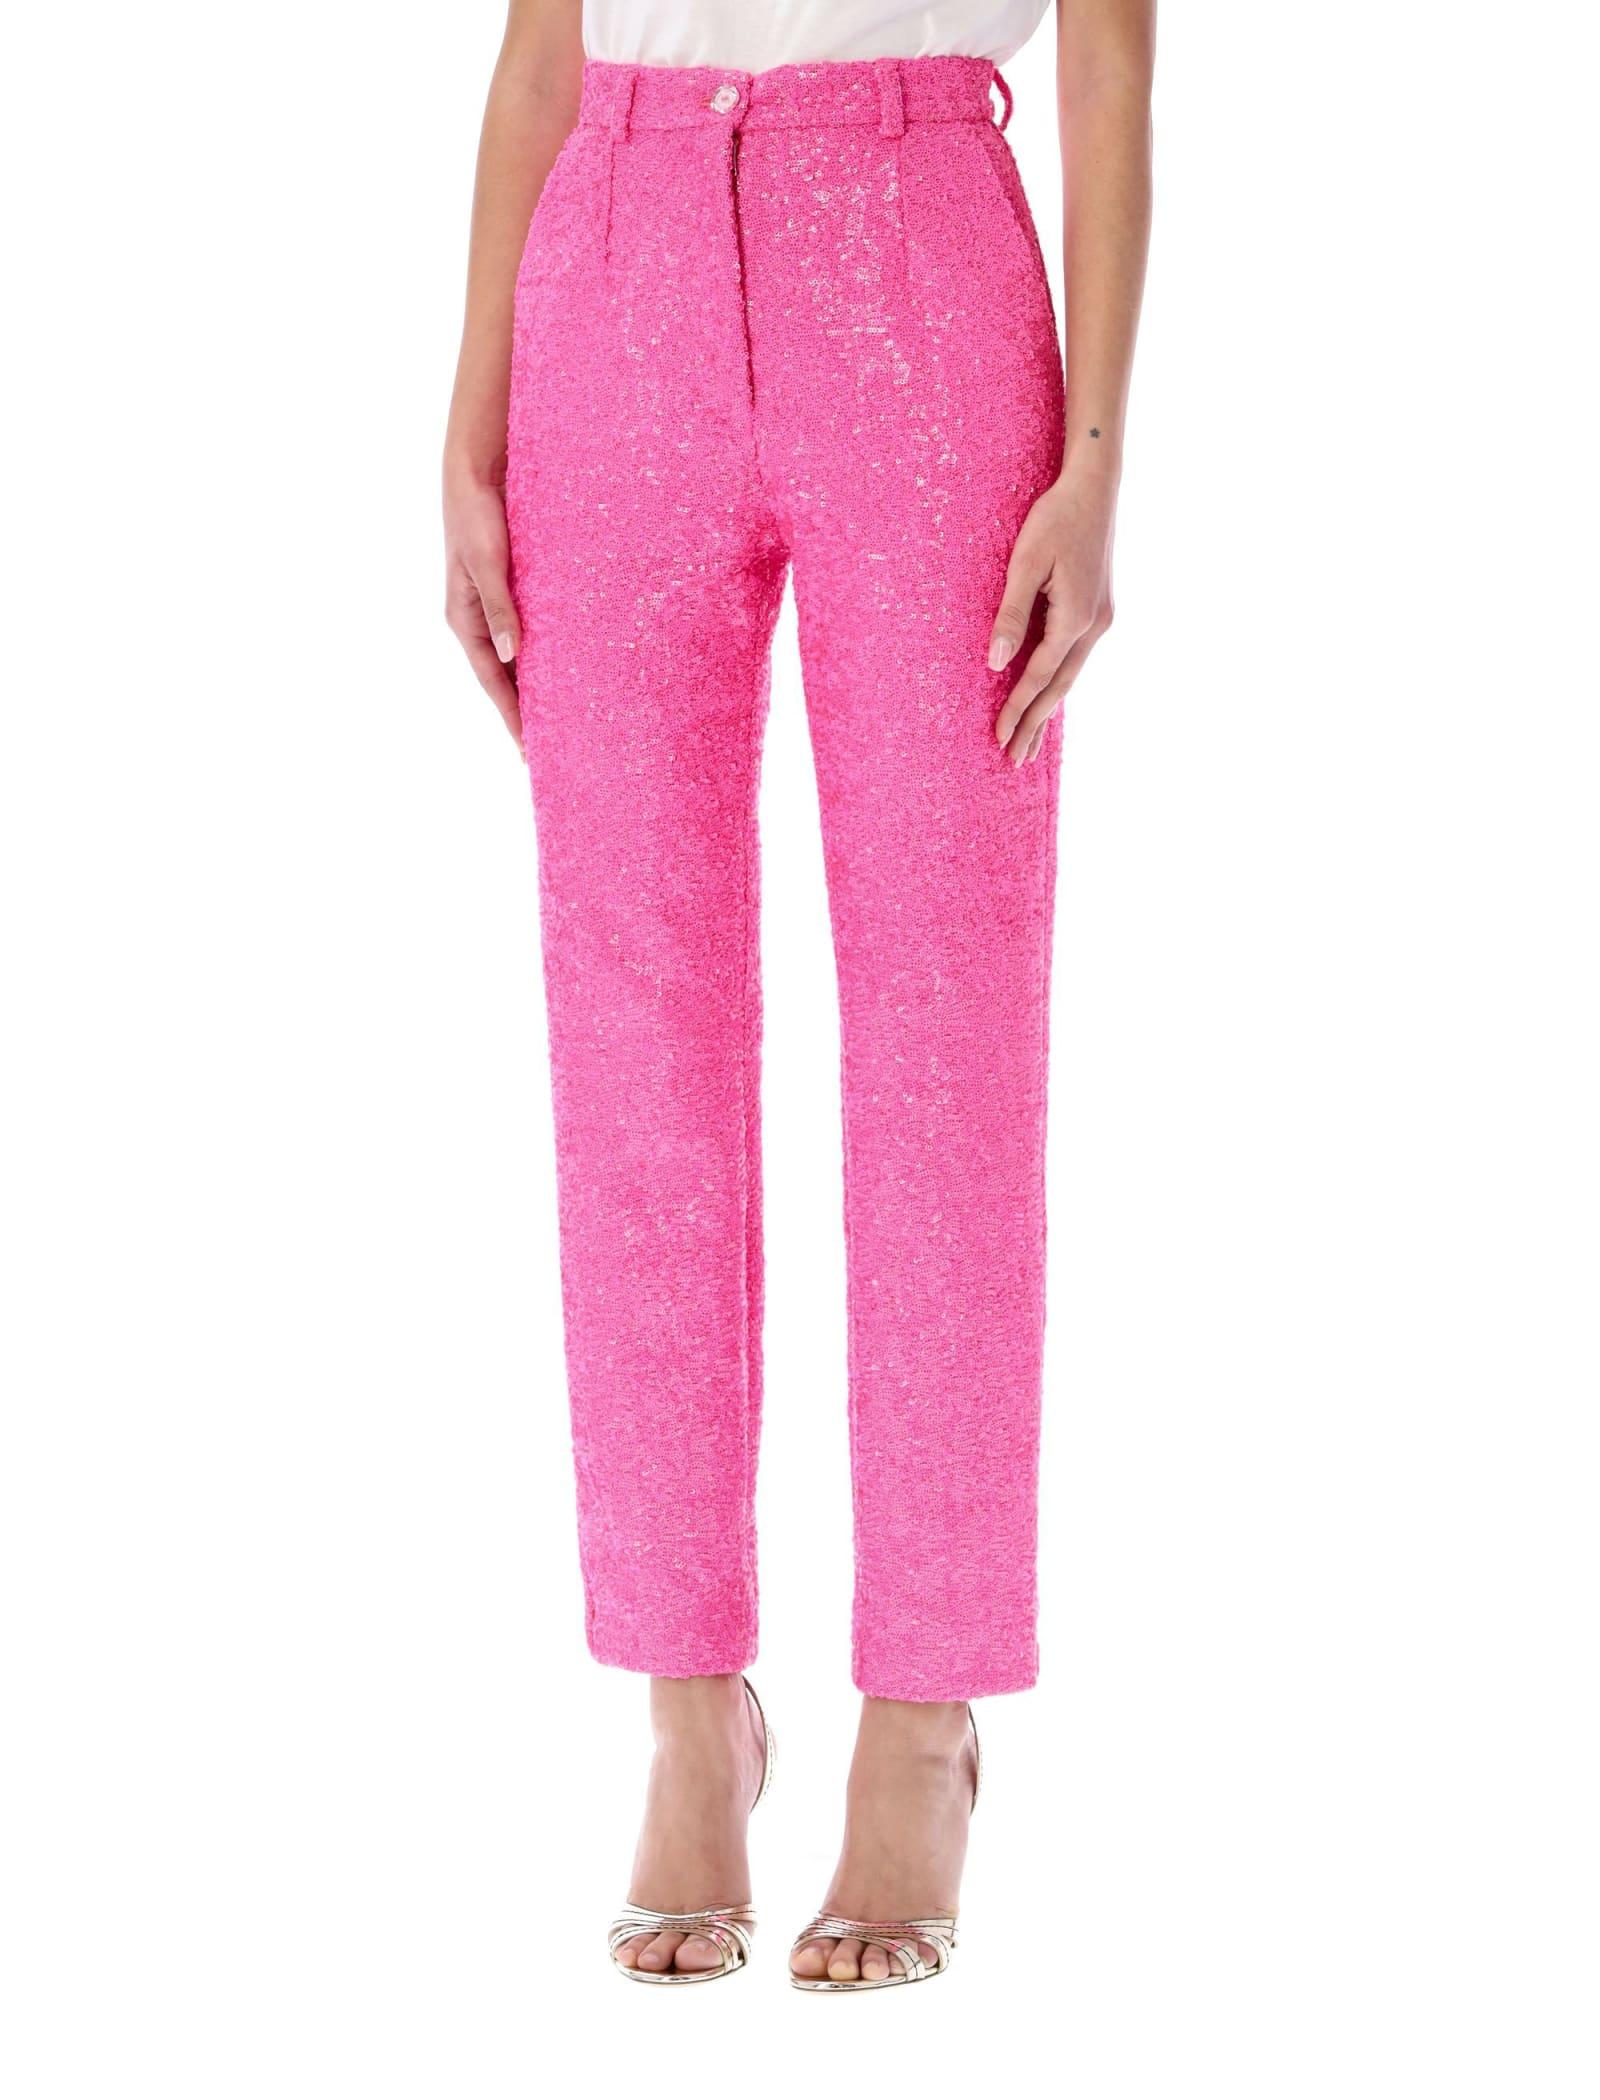 Dolce & Gabbana Sequined Pants in Pink